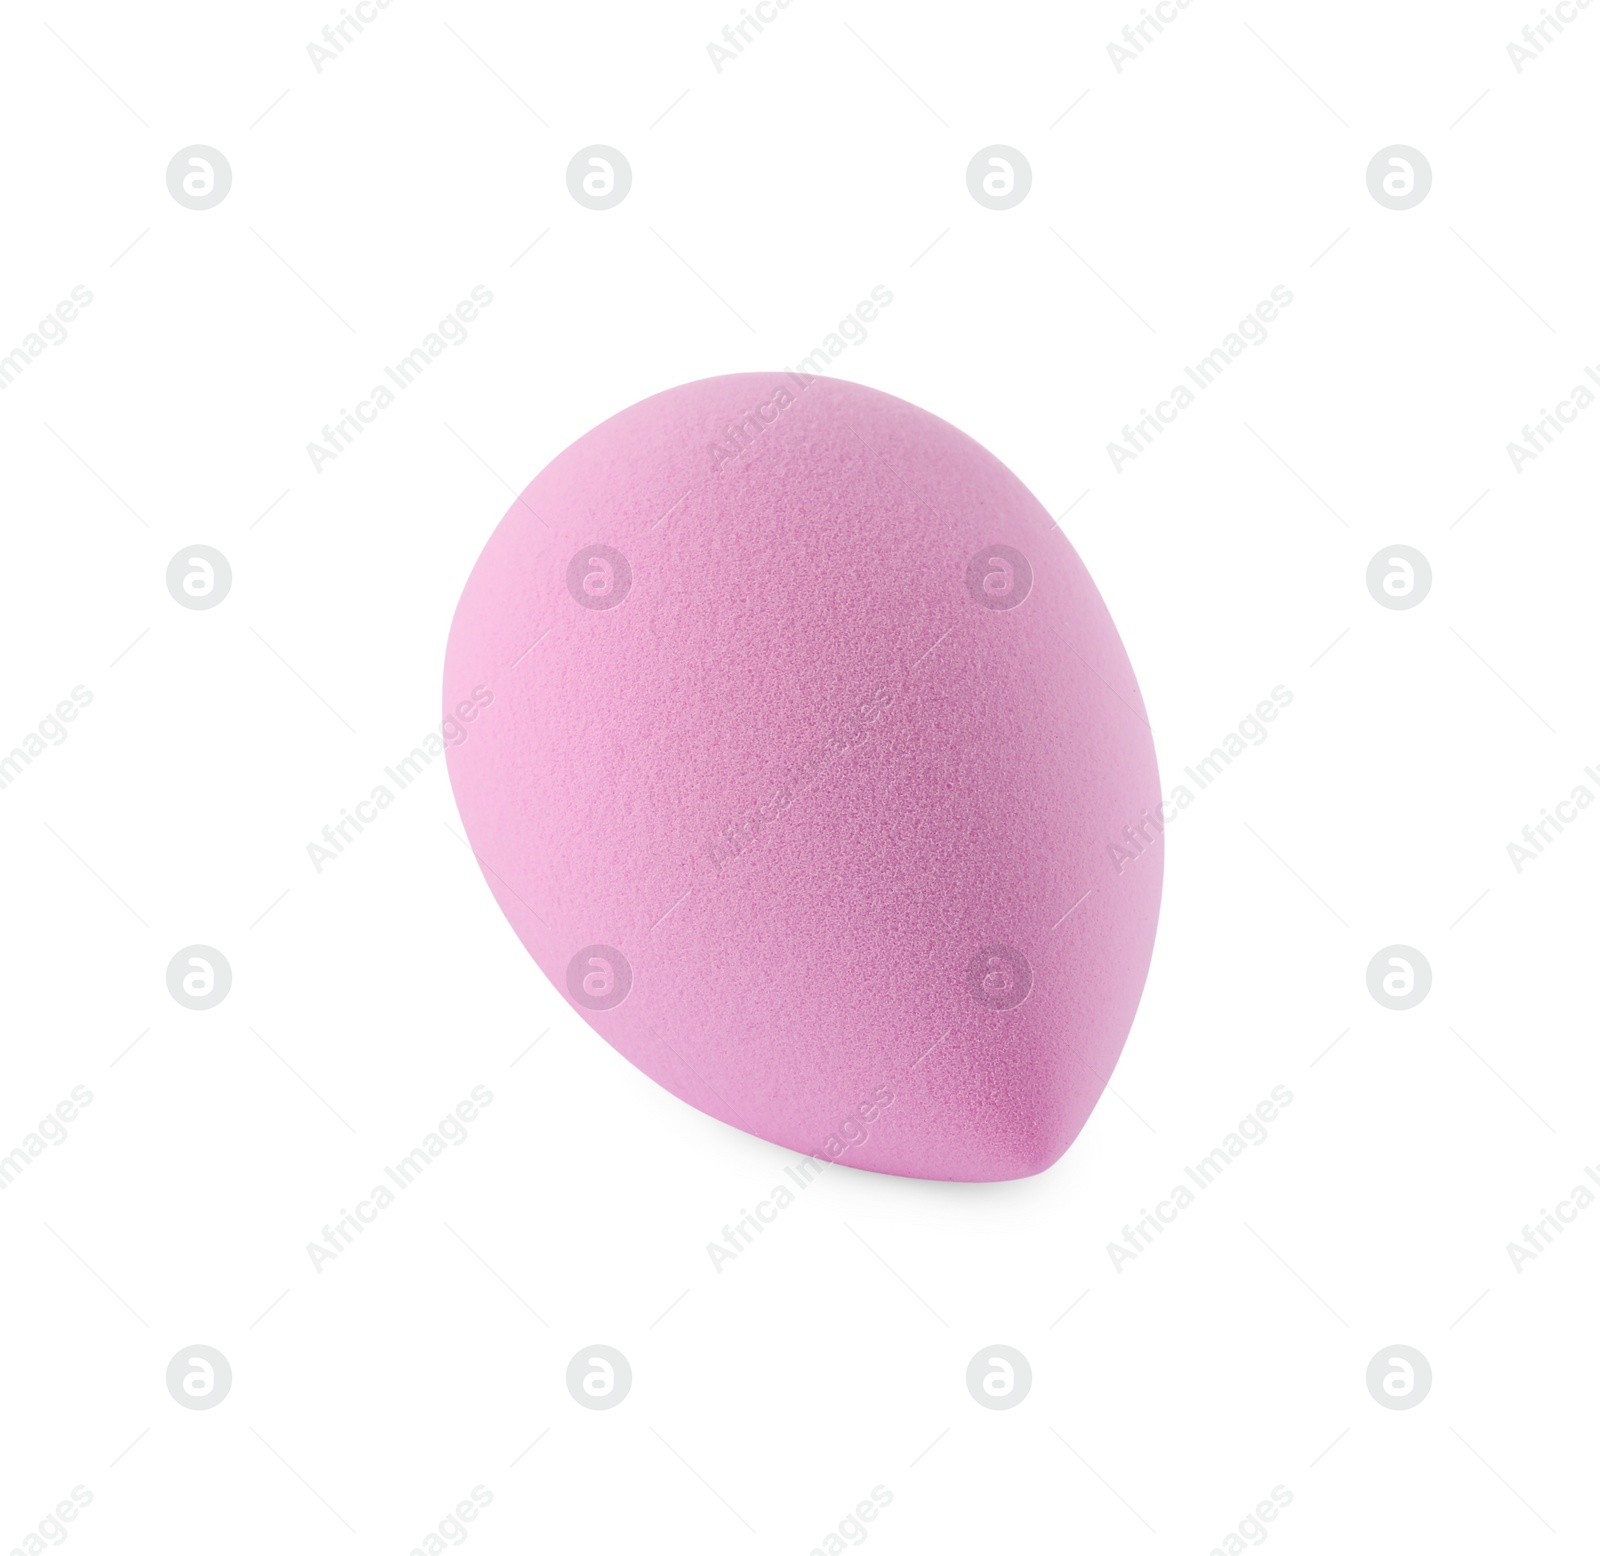 Photo of One pink makeup sponge isolated on white